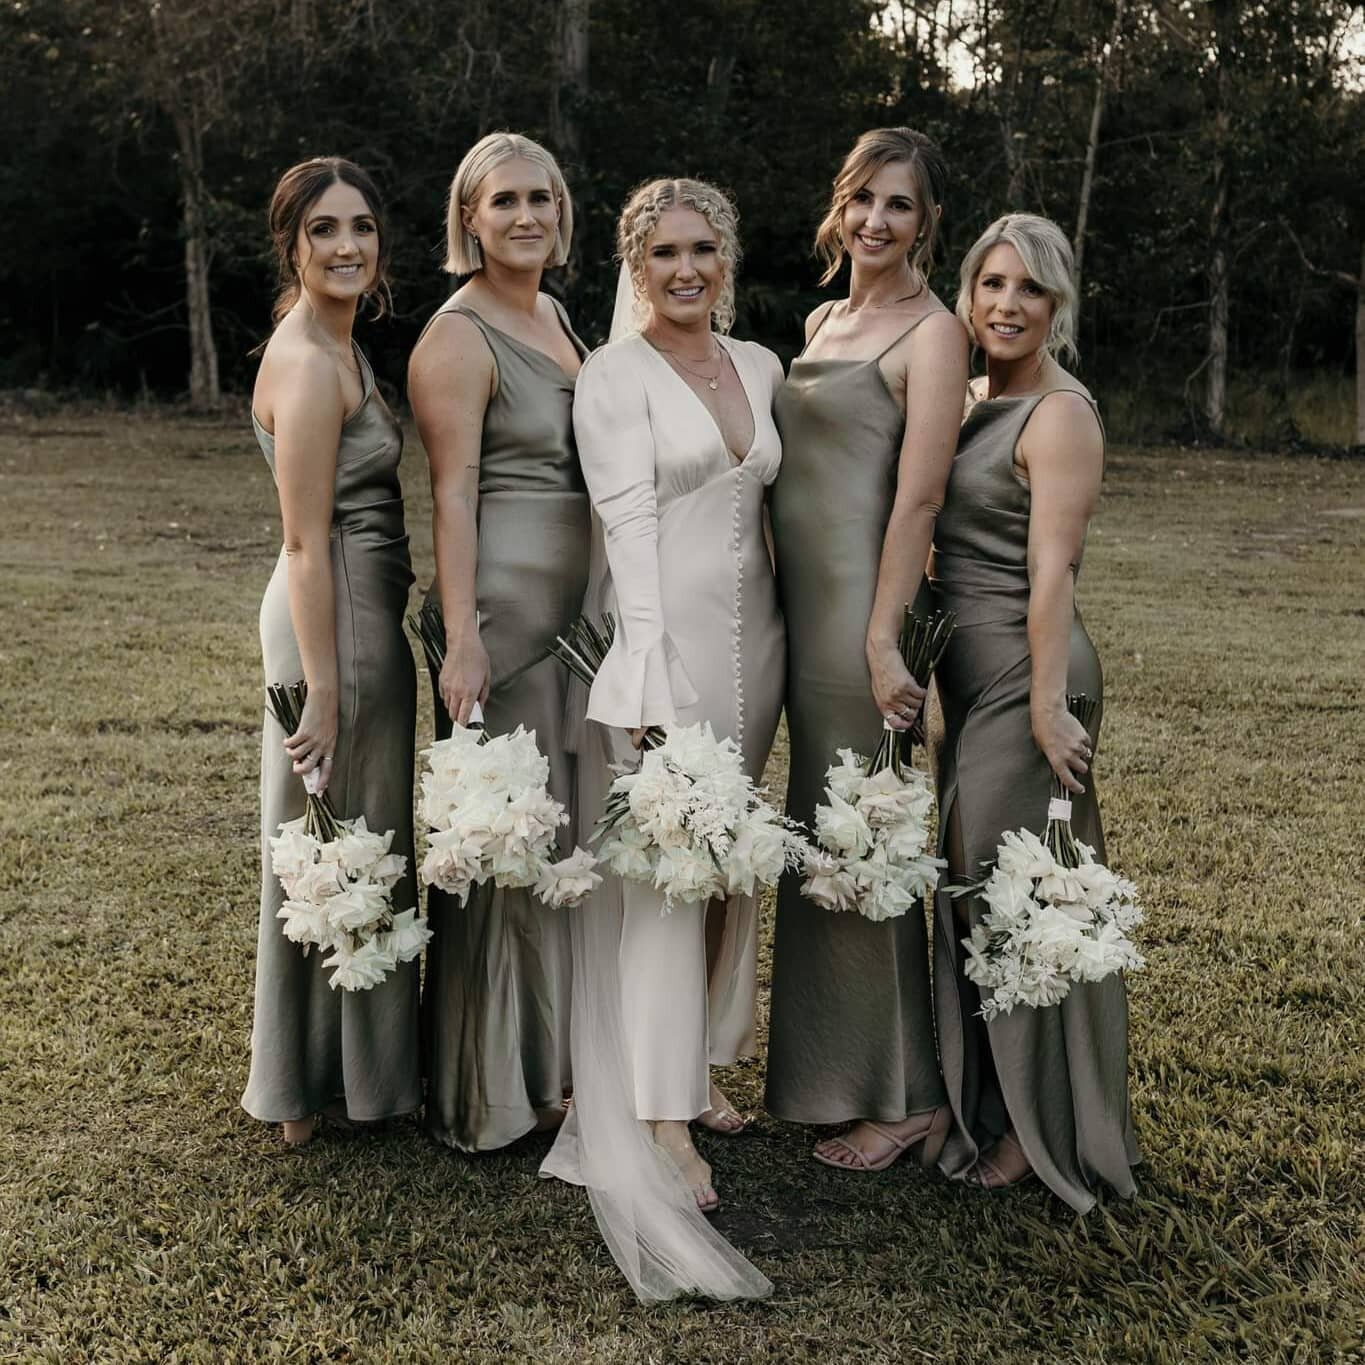 I just love weddings. I have the best job. Was a fun day hanging out with this gorgeous group of girls. It's always so lovely meeting other Sunny Coast locals 💗